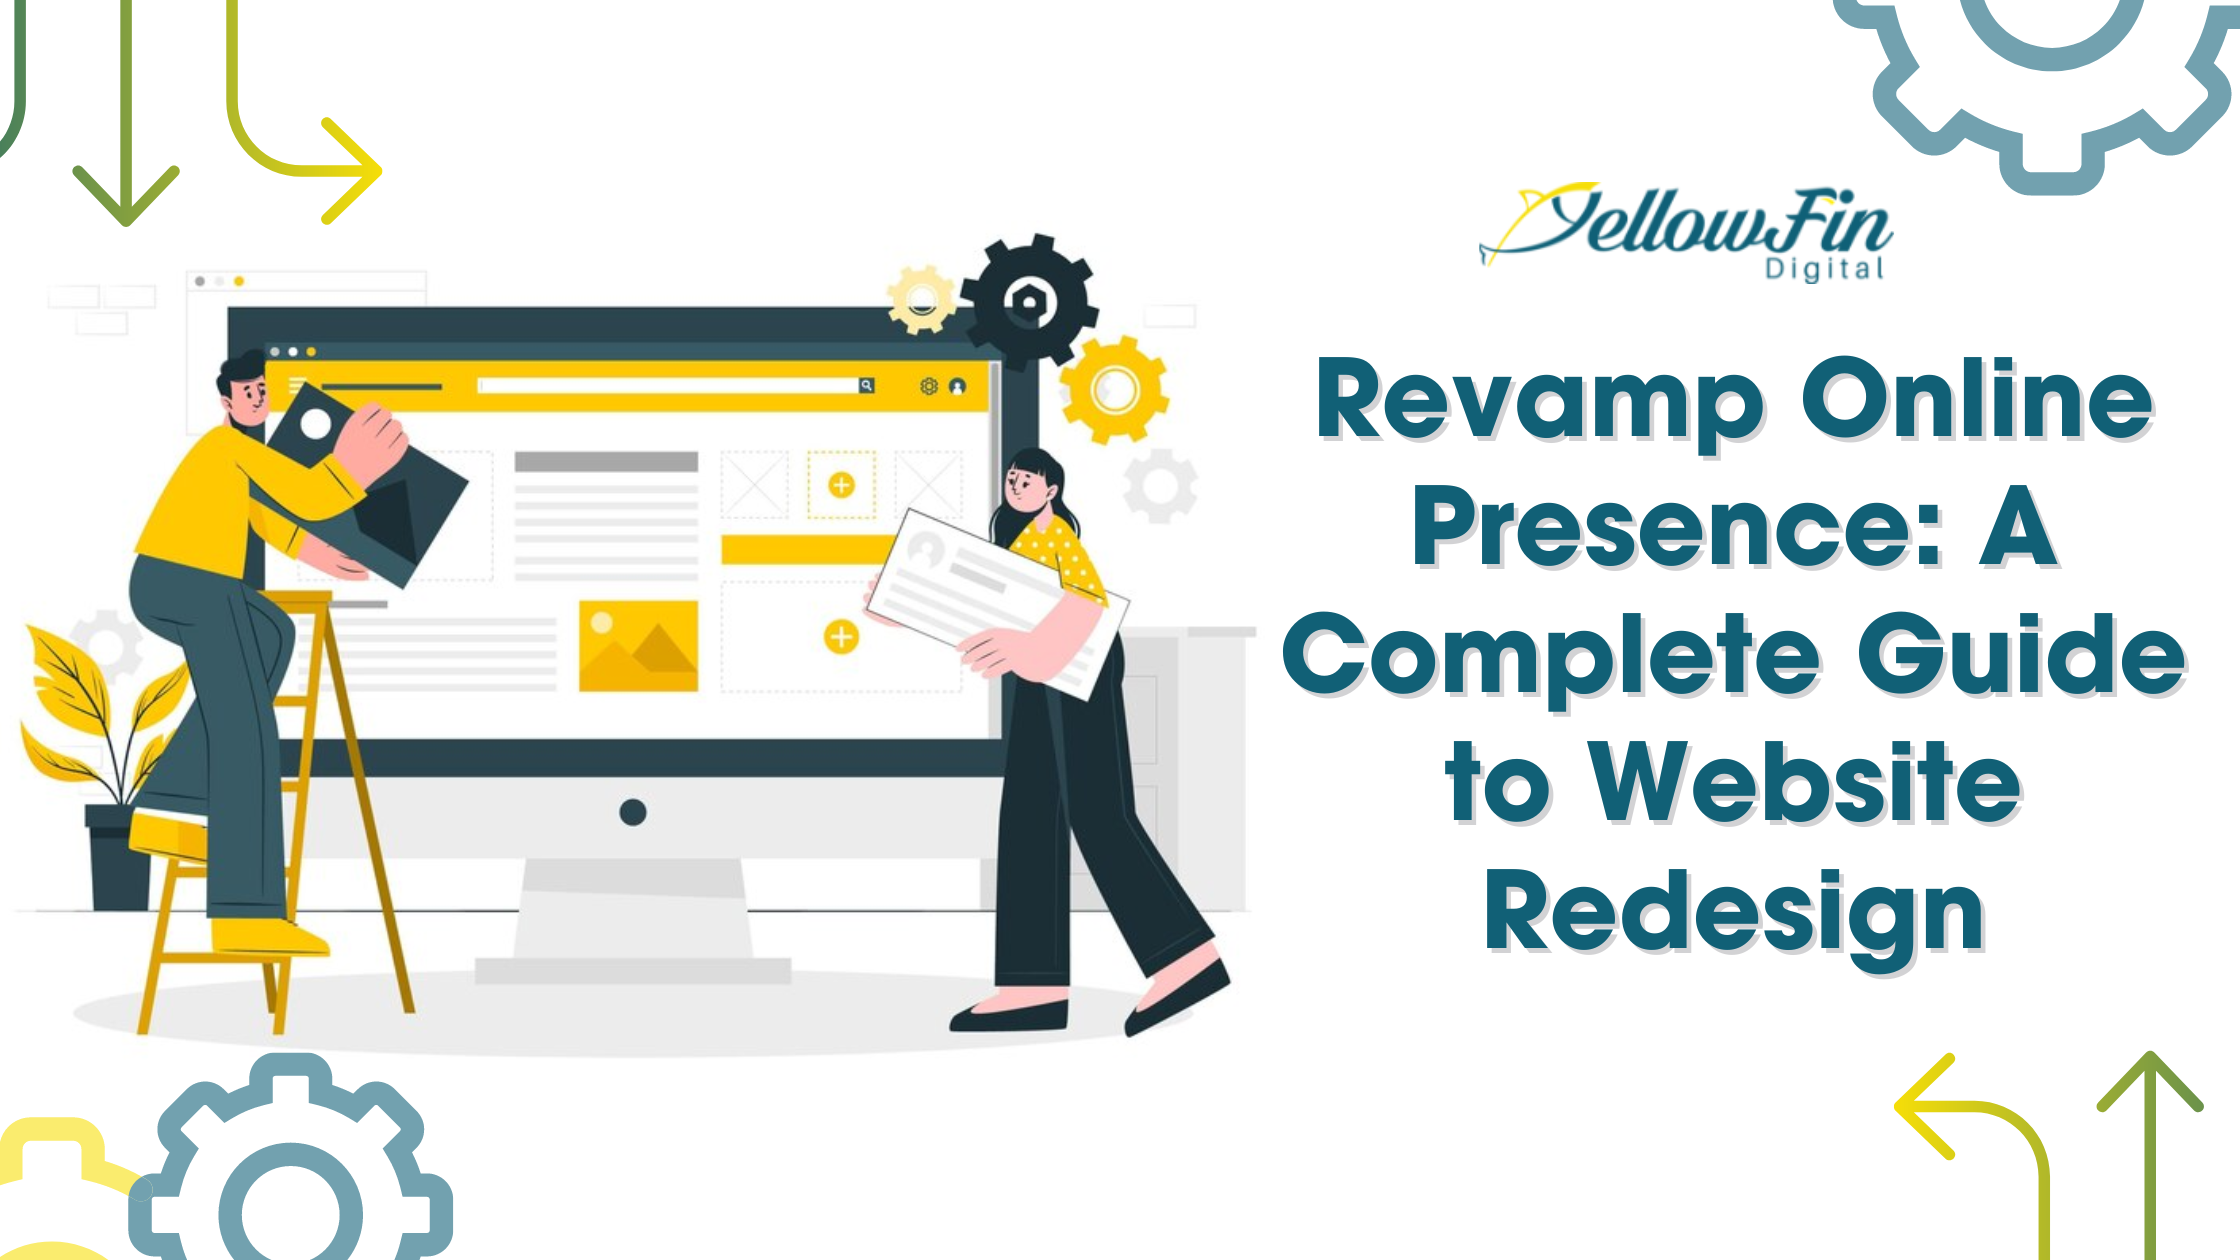 Revamp Online Presence: A Complete Guide to Website Redesign - AtoAllinks